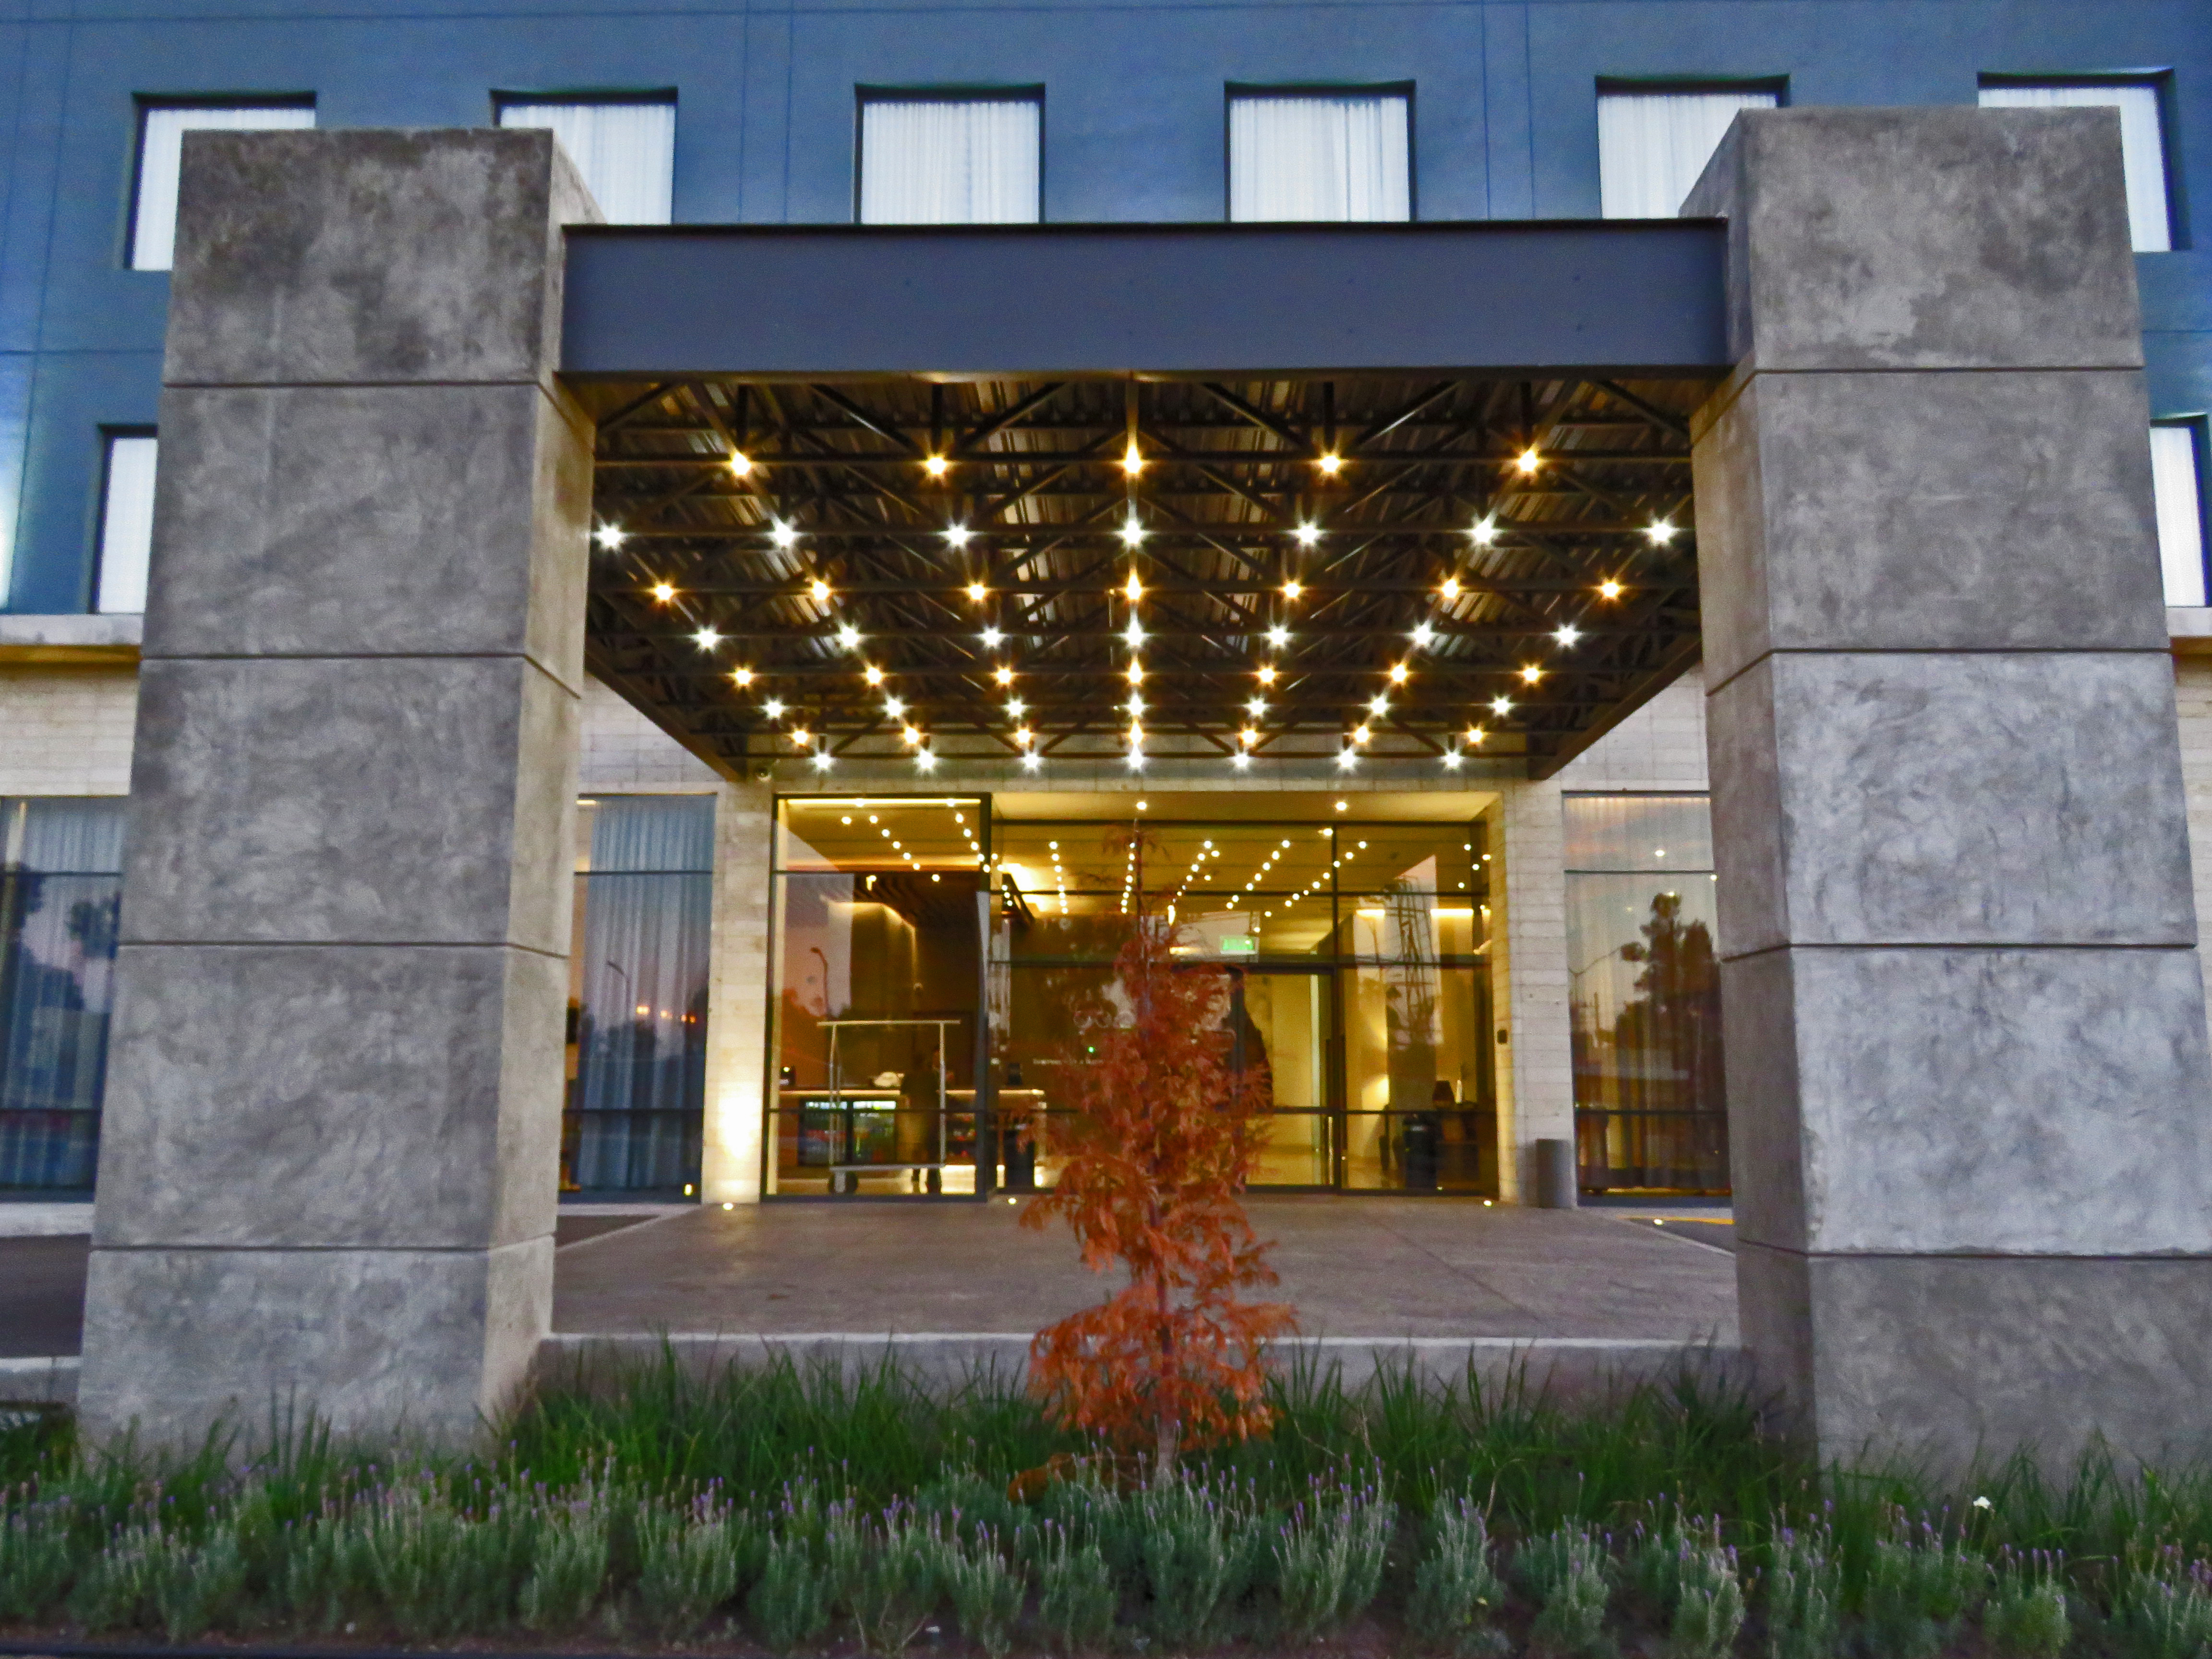 Exterior View of Hotel Front Entrance, Landscaping, and Illuminated Drive